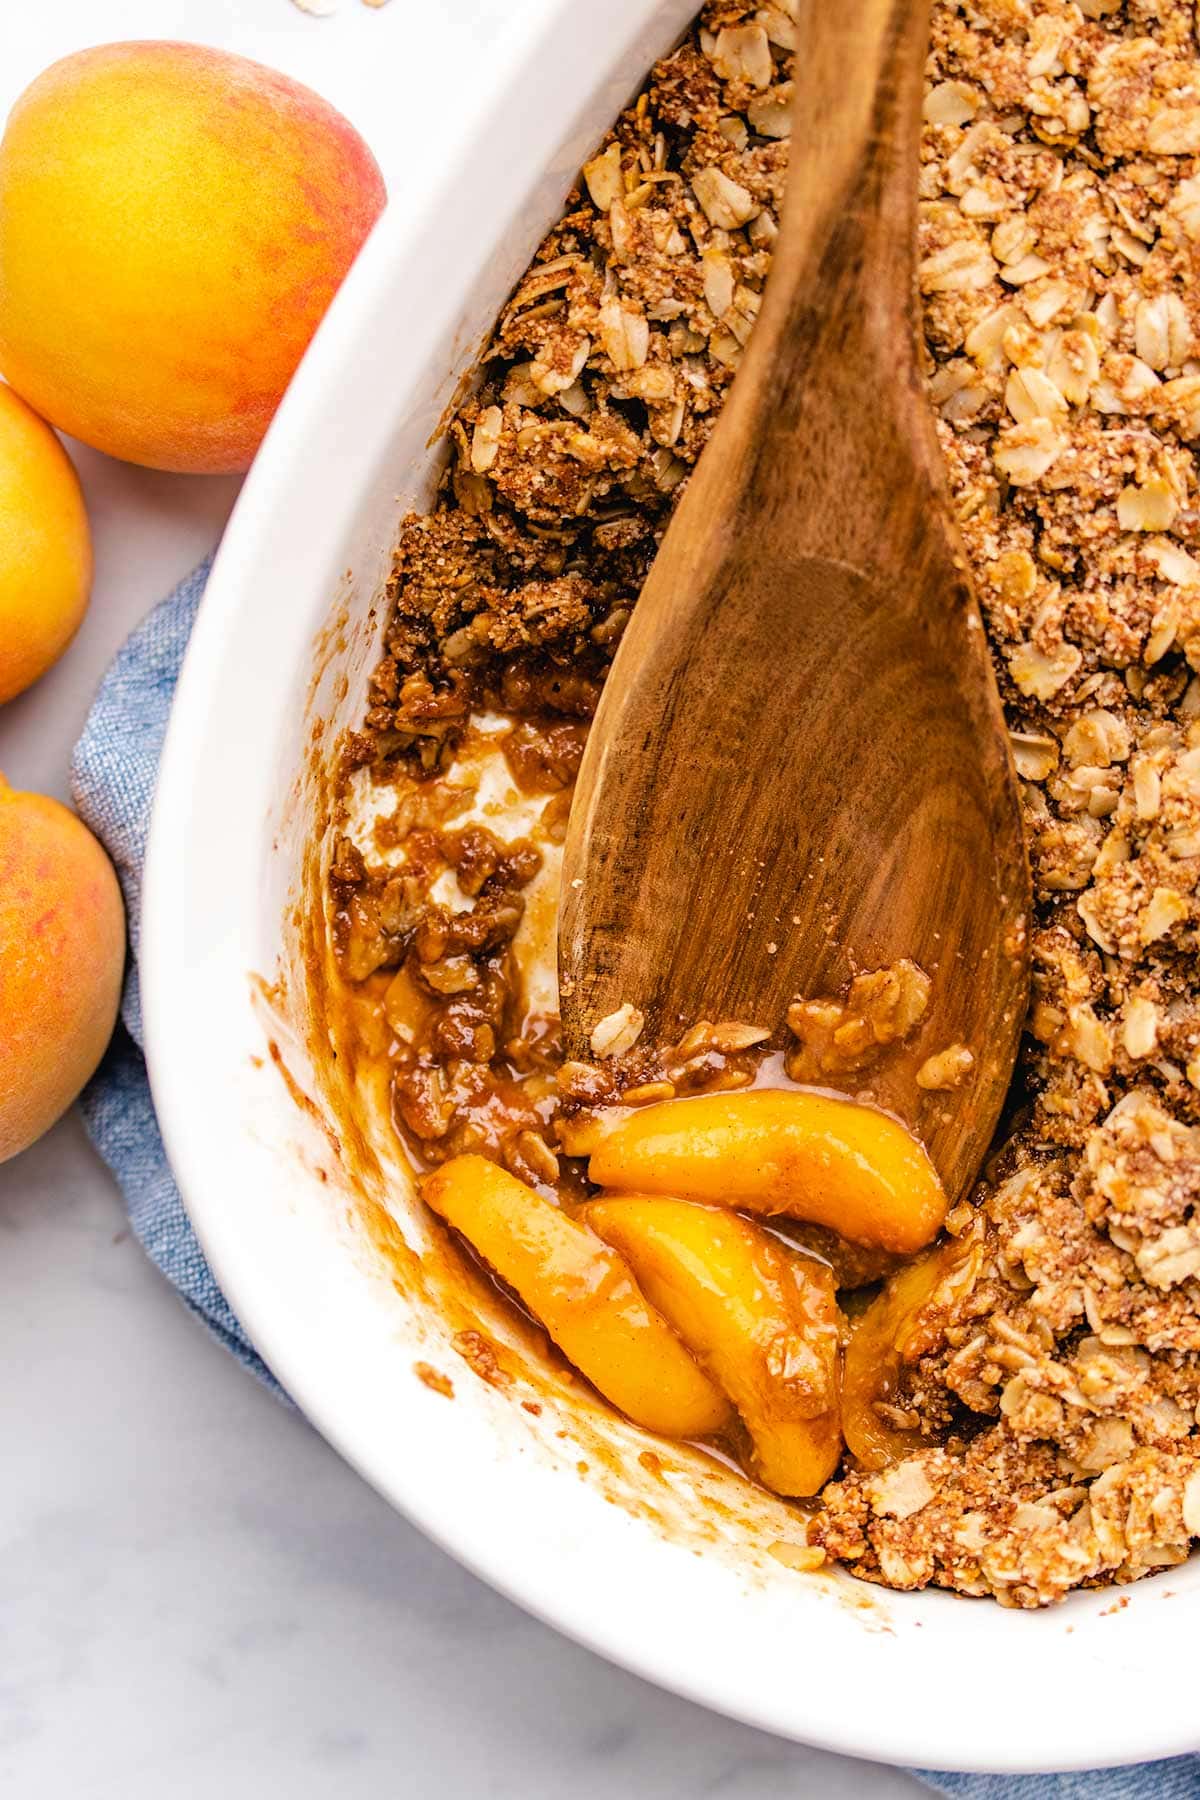 A wooden spoon taking a scoop of peach crisp from a white casserole dish